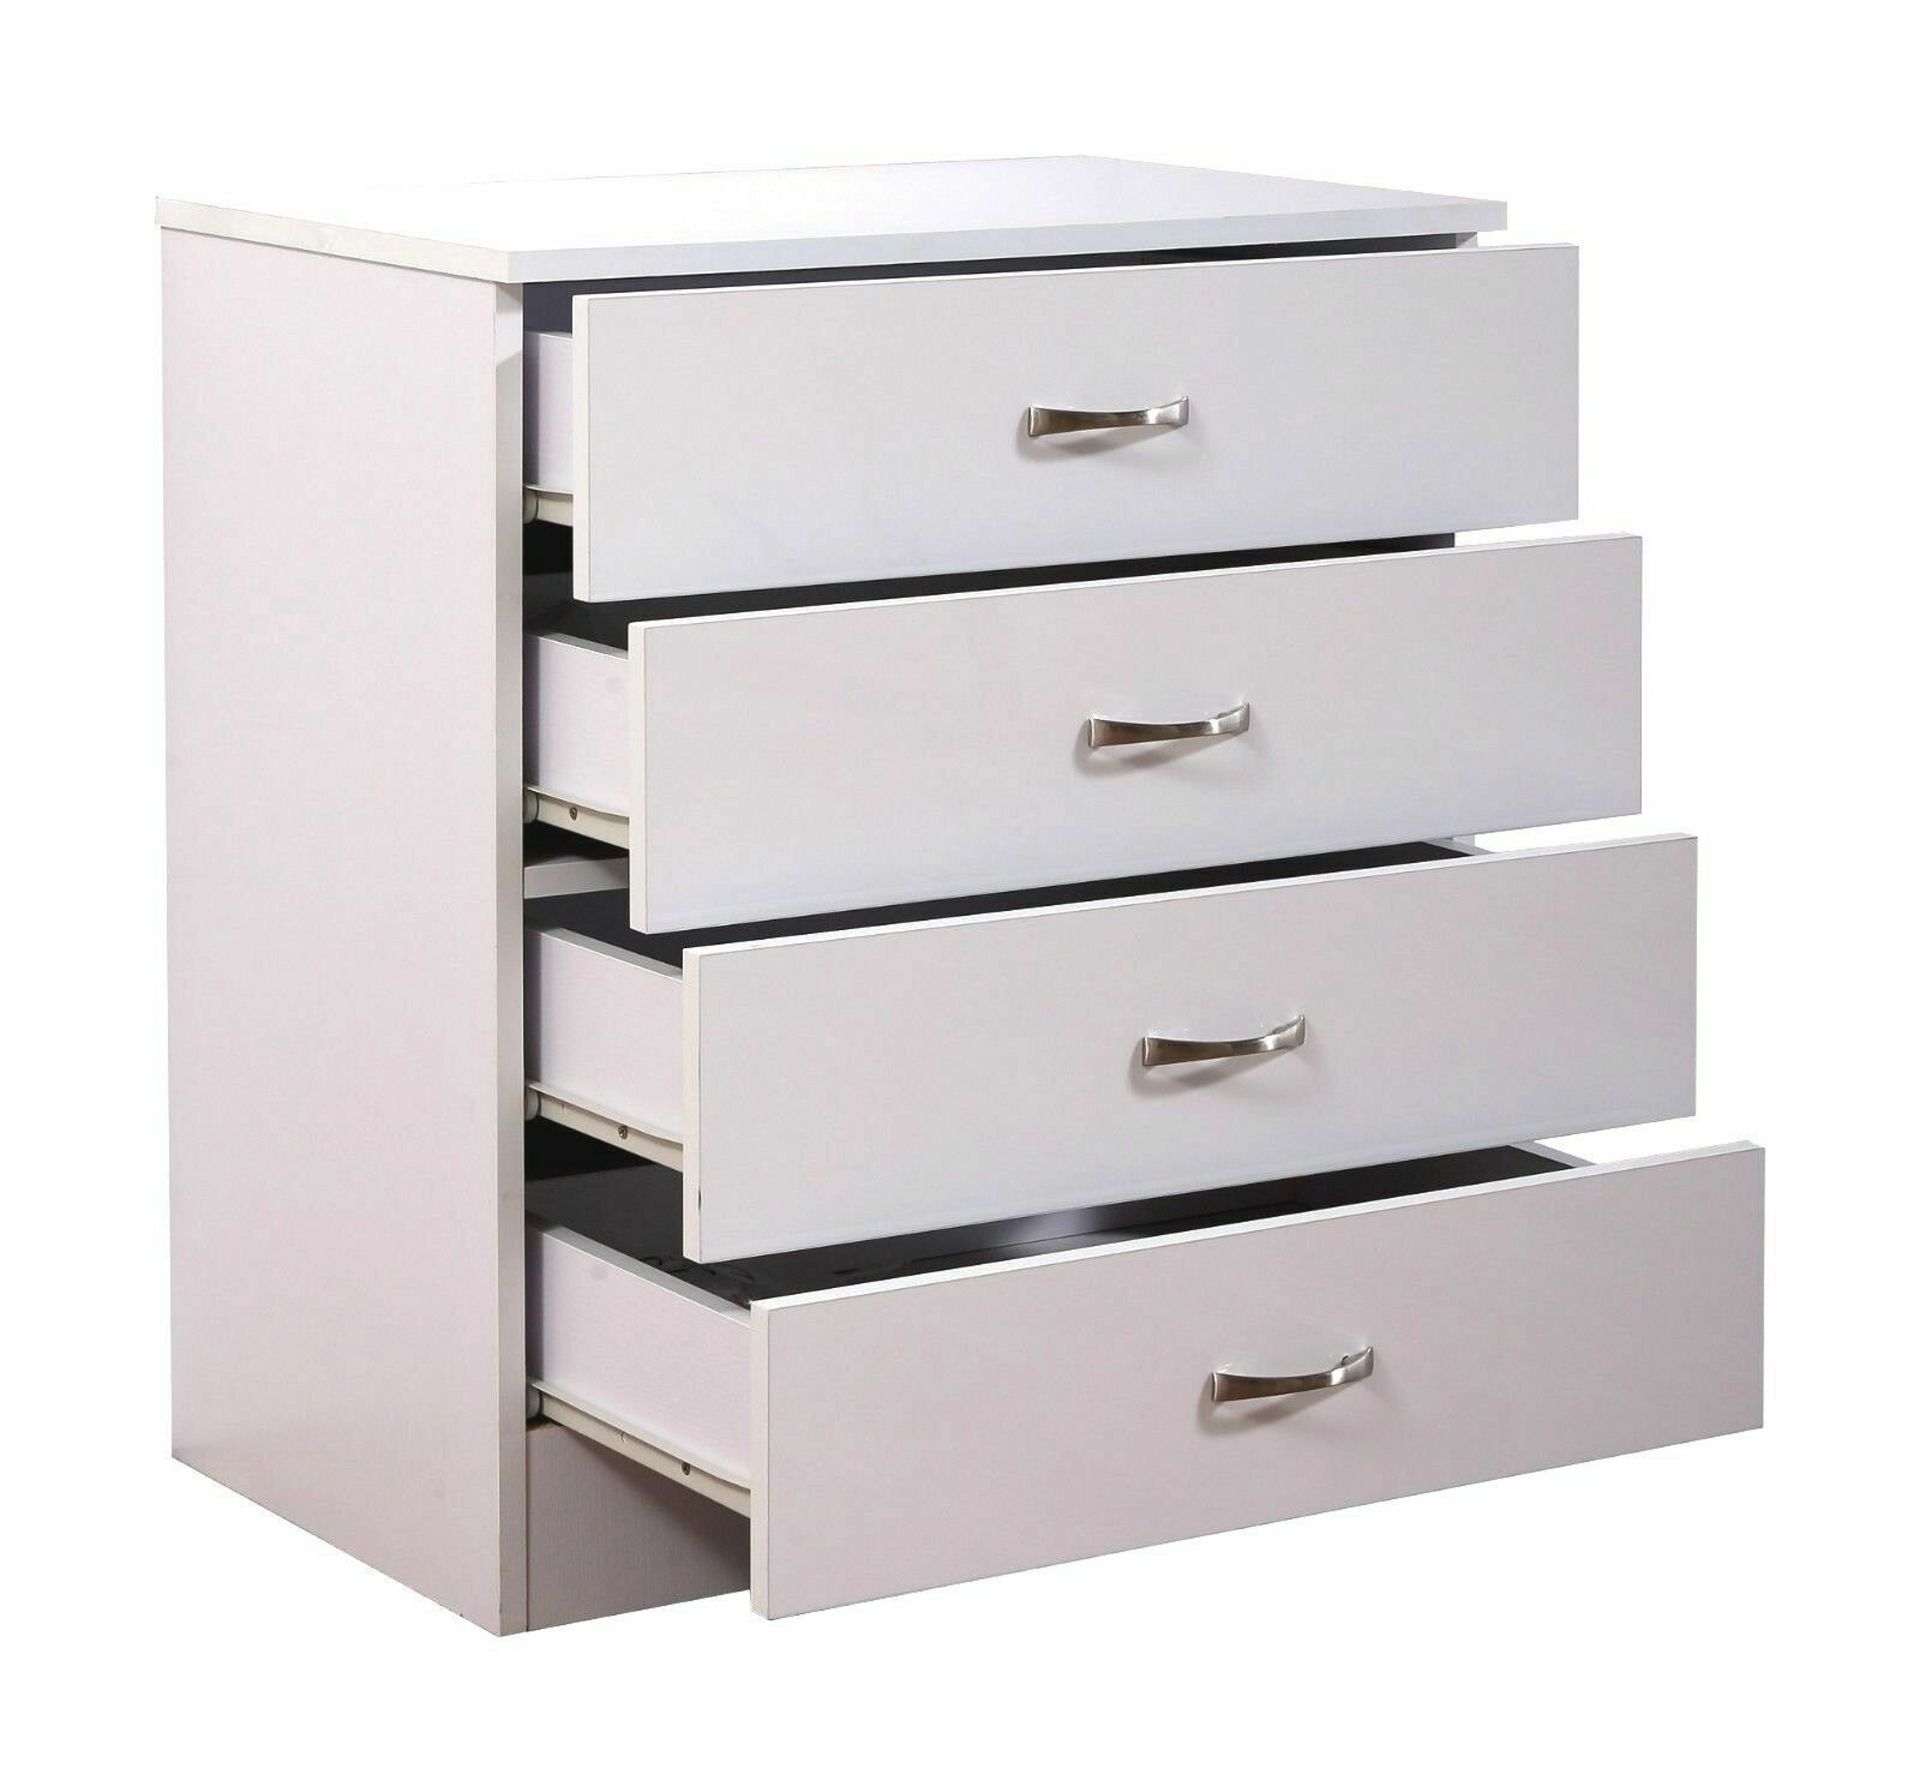 HIGH GLOSS WHITE 4 DRAWER CHEST - Image 4 of 4